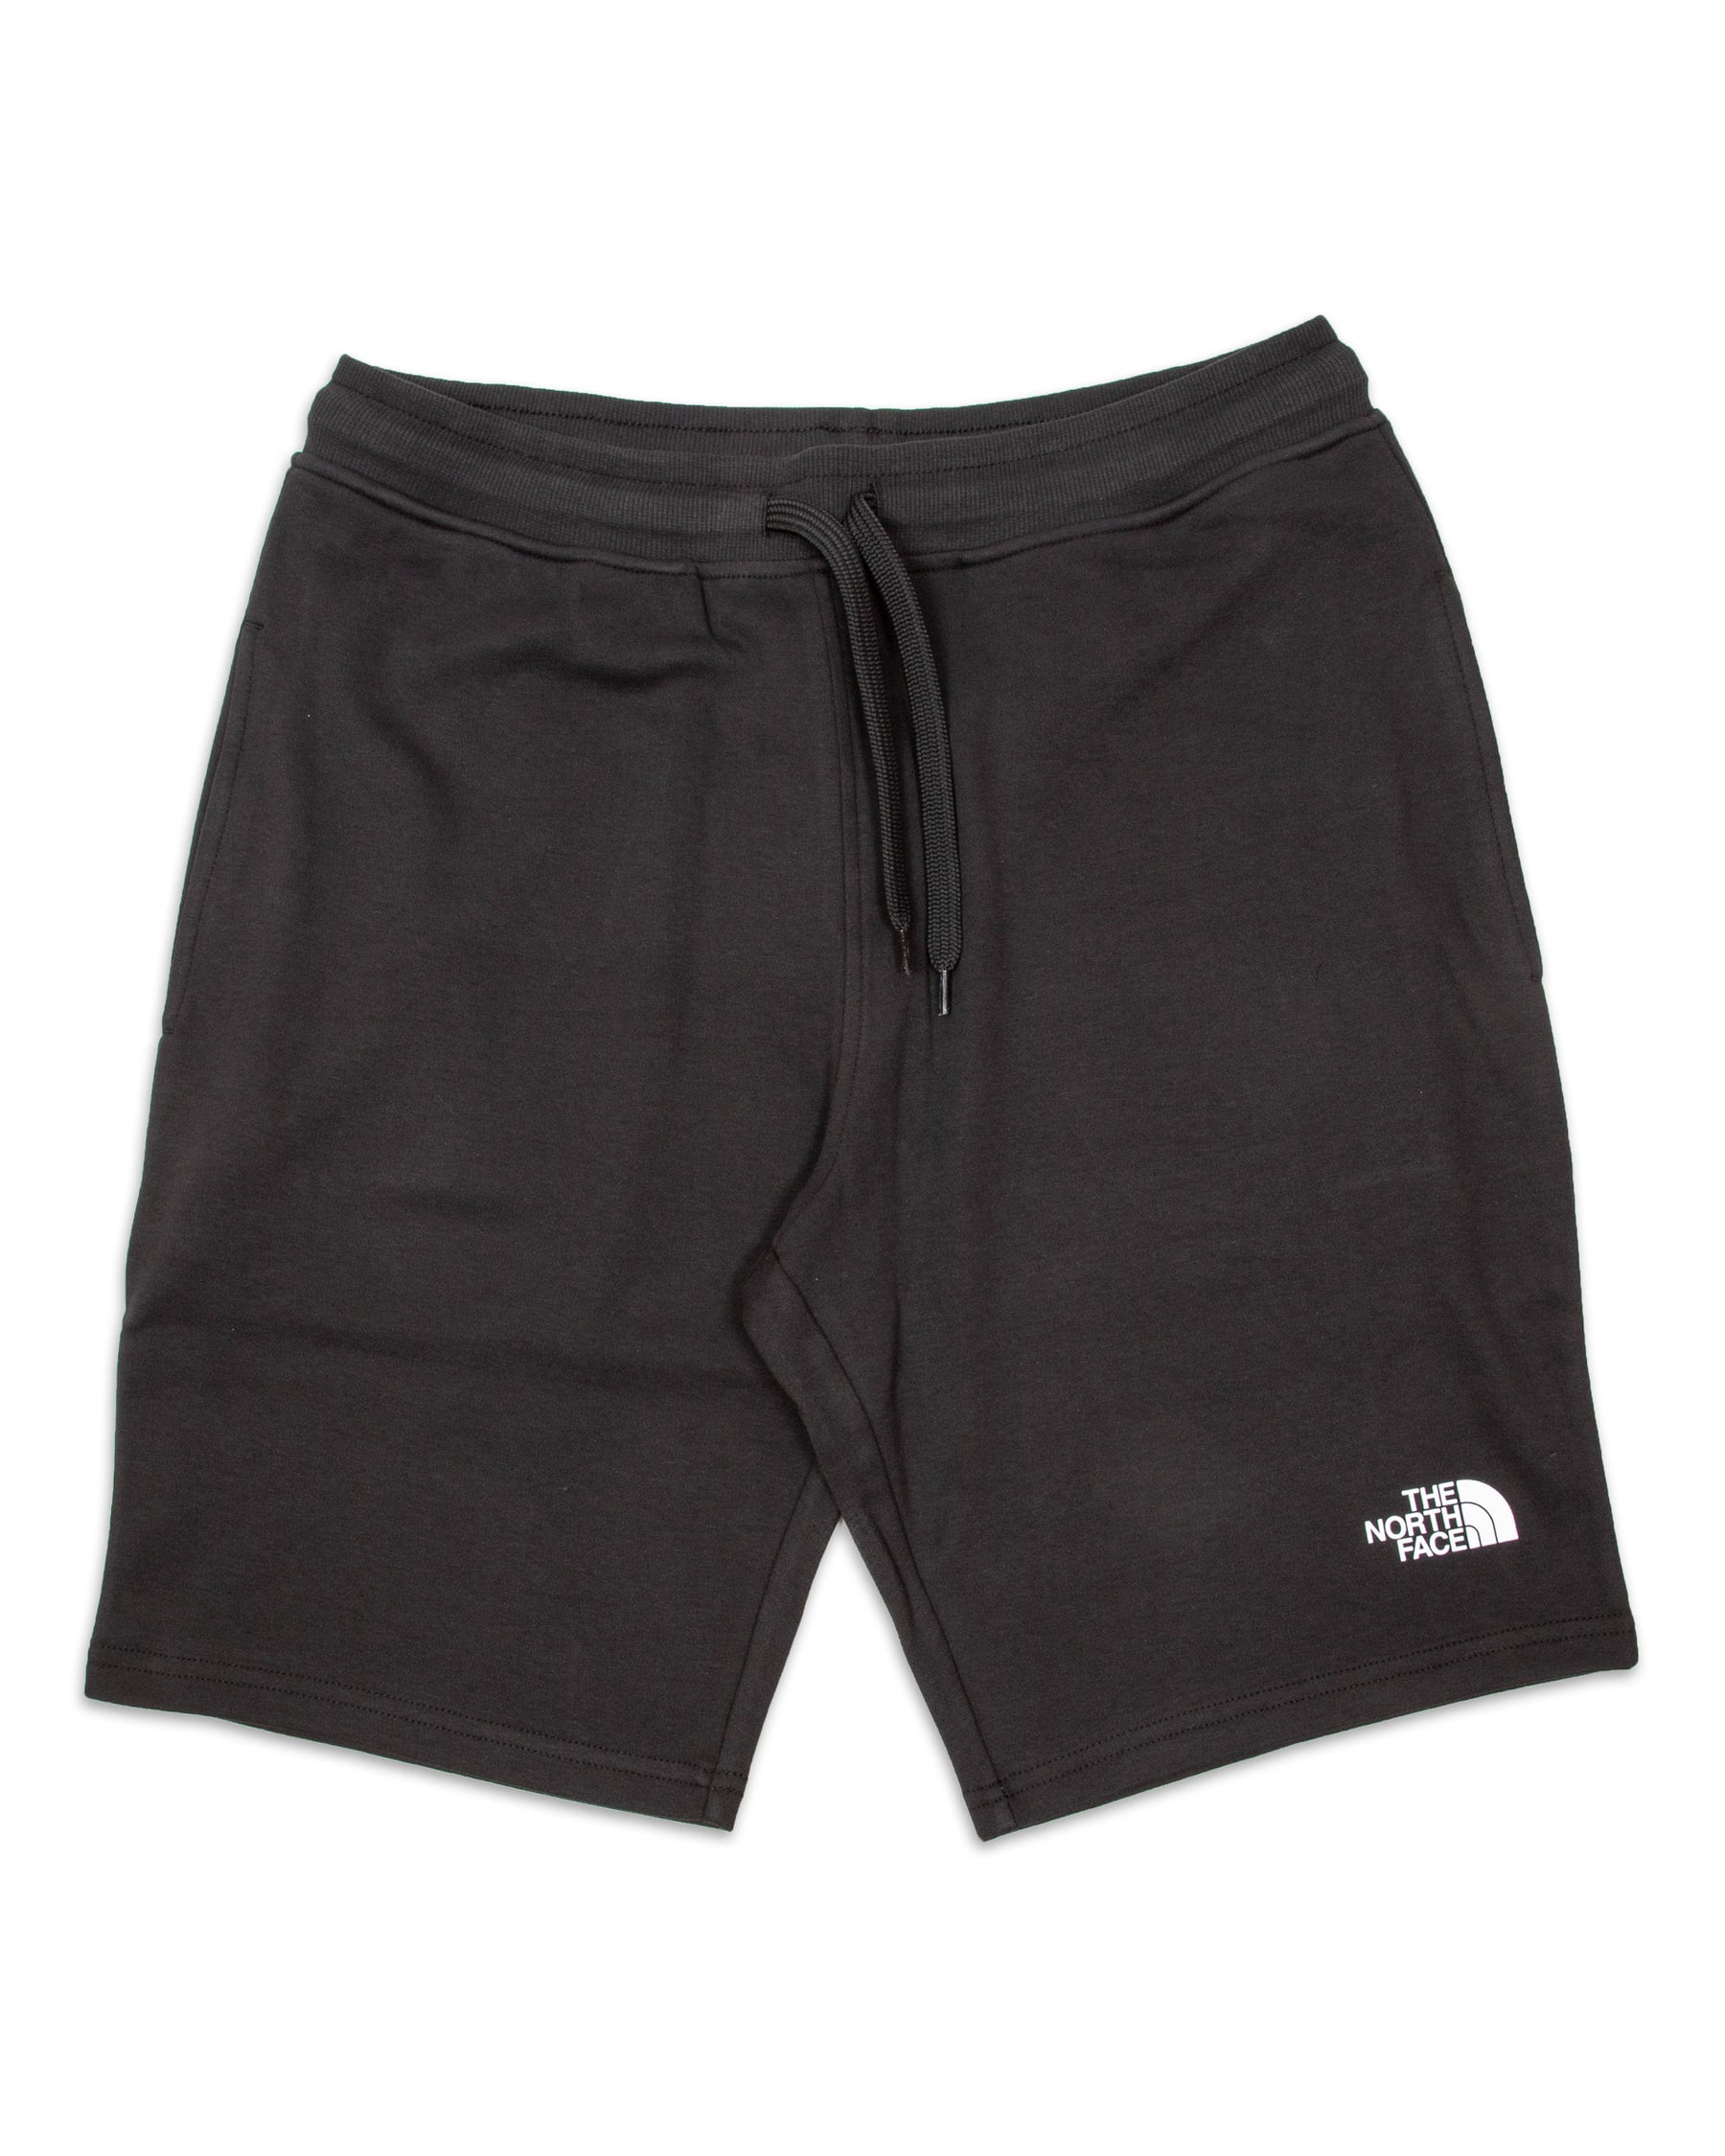 Man Short The North Face Graphic Black